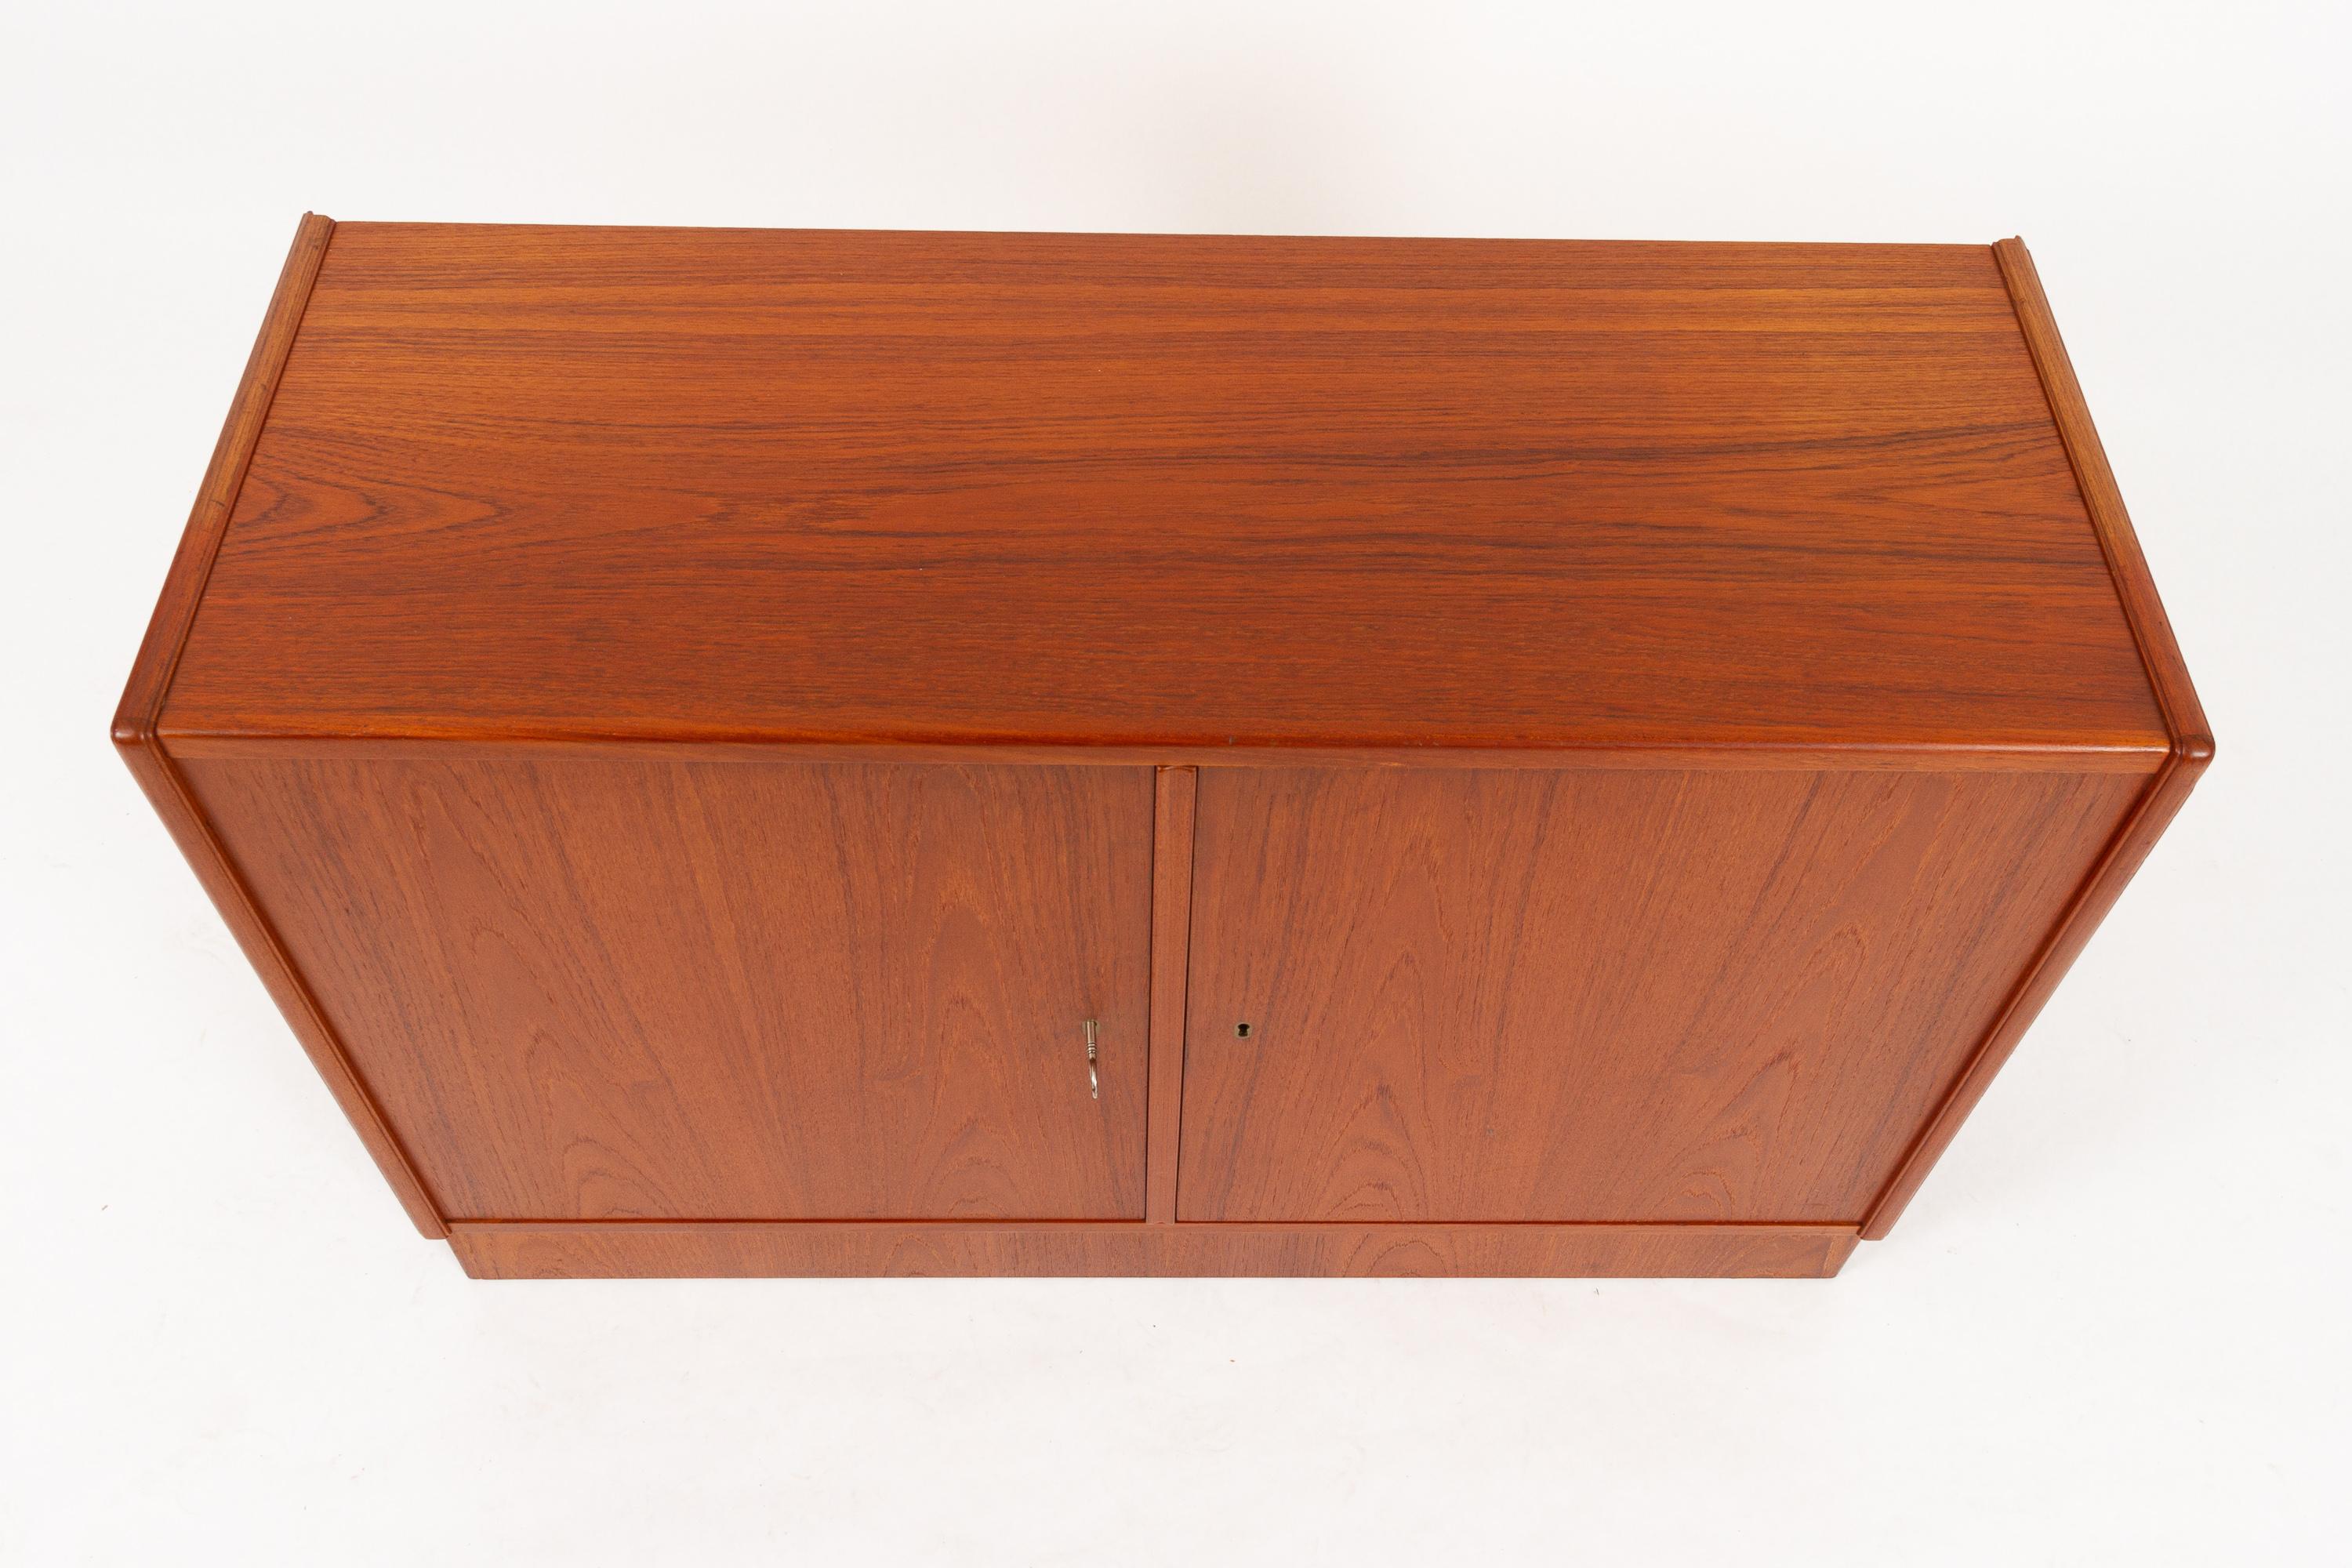 Vintage Danish Teak Cabinet 1960s.
Midcentury modern teak sideboard with two doors and two compartments. Each compartment is divided by one shelf. Shelves are adjustable by hand. Each door has a lock, and one key is included, fits both locks.